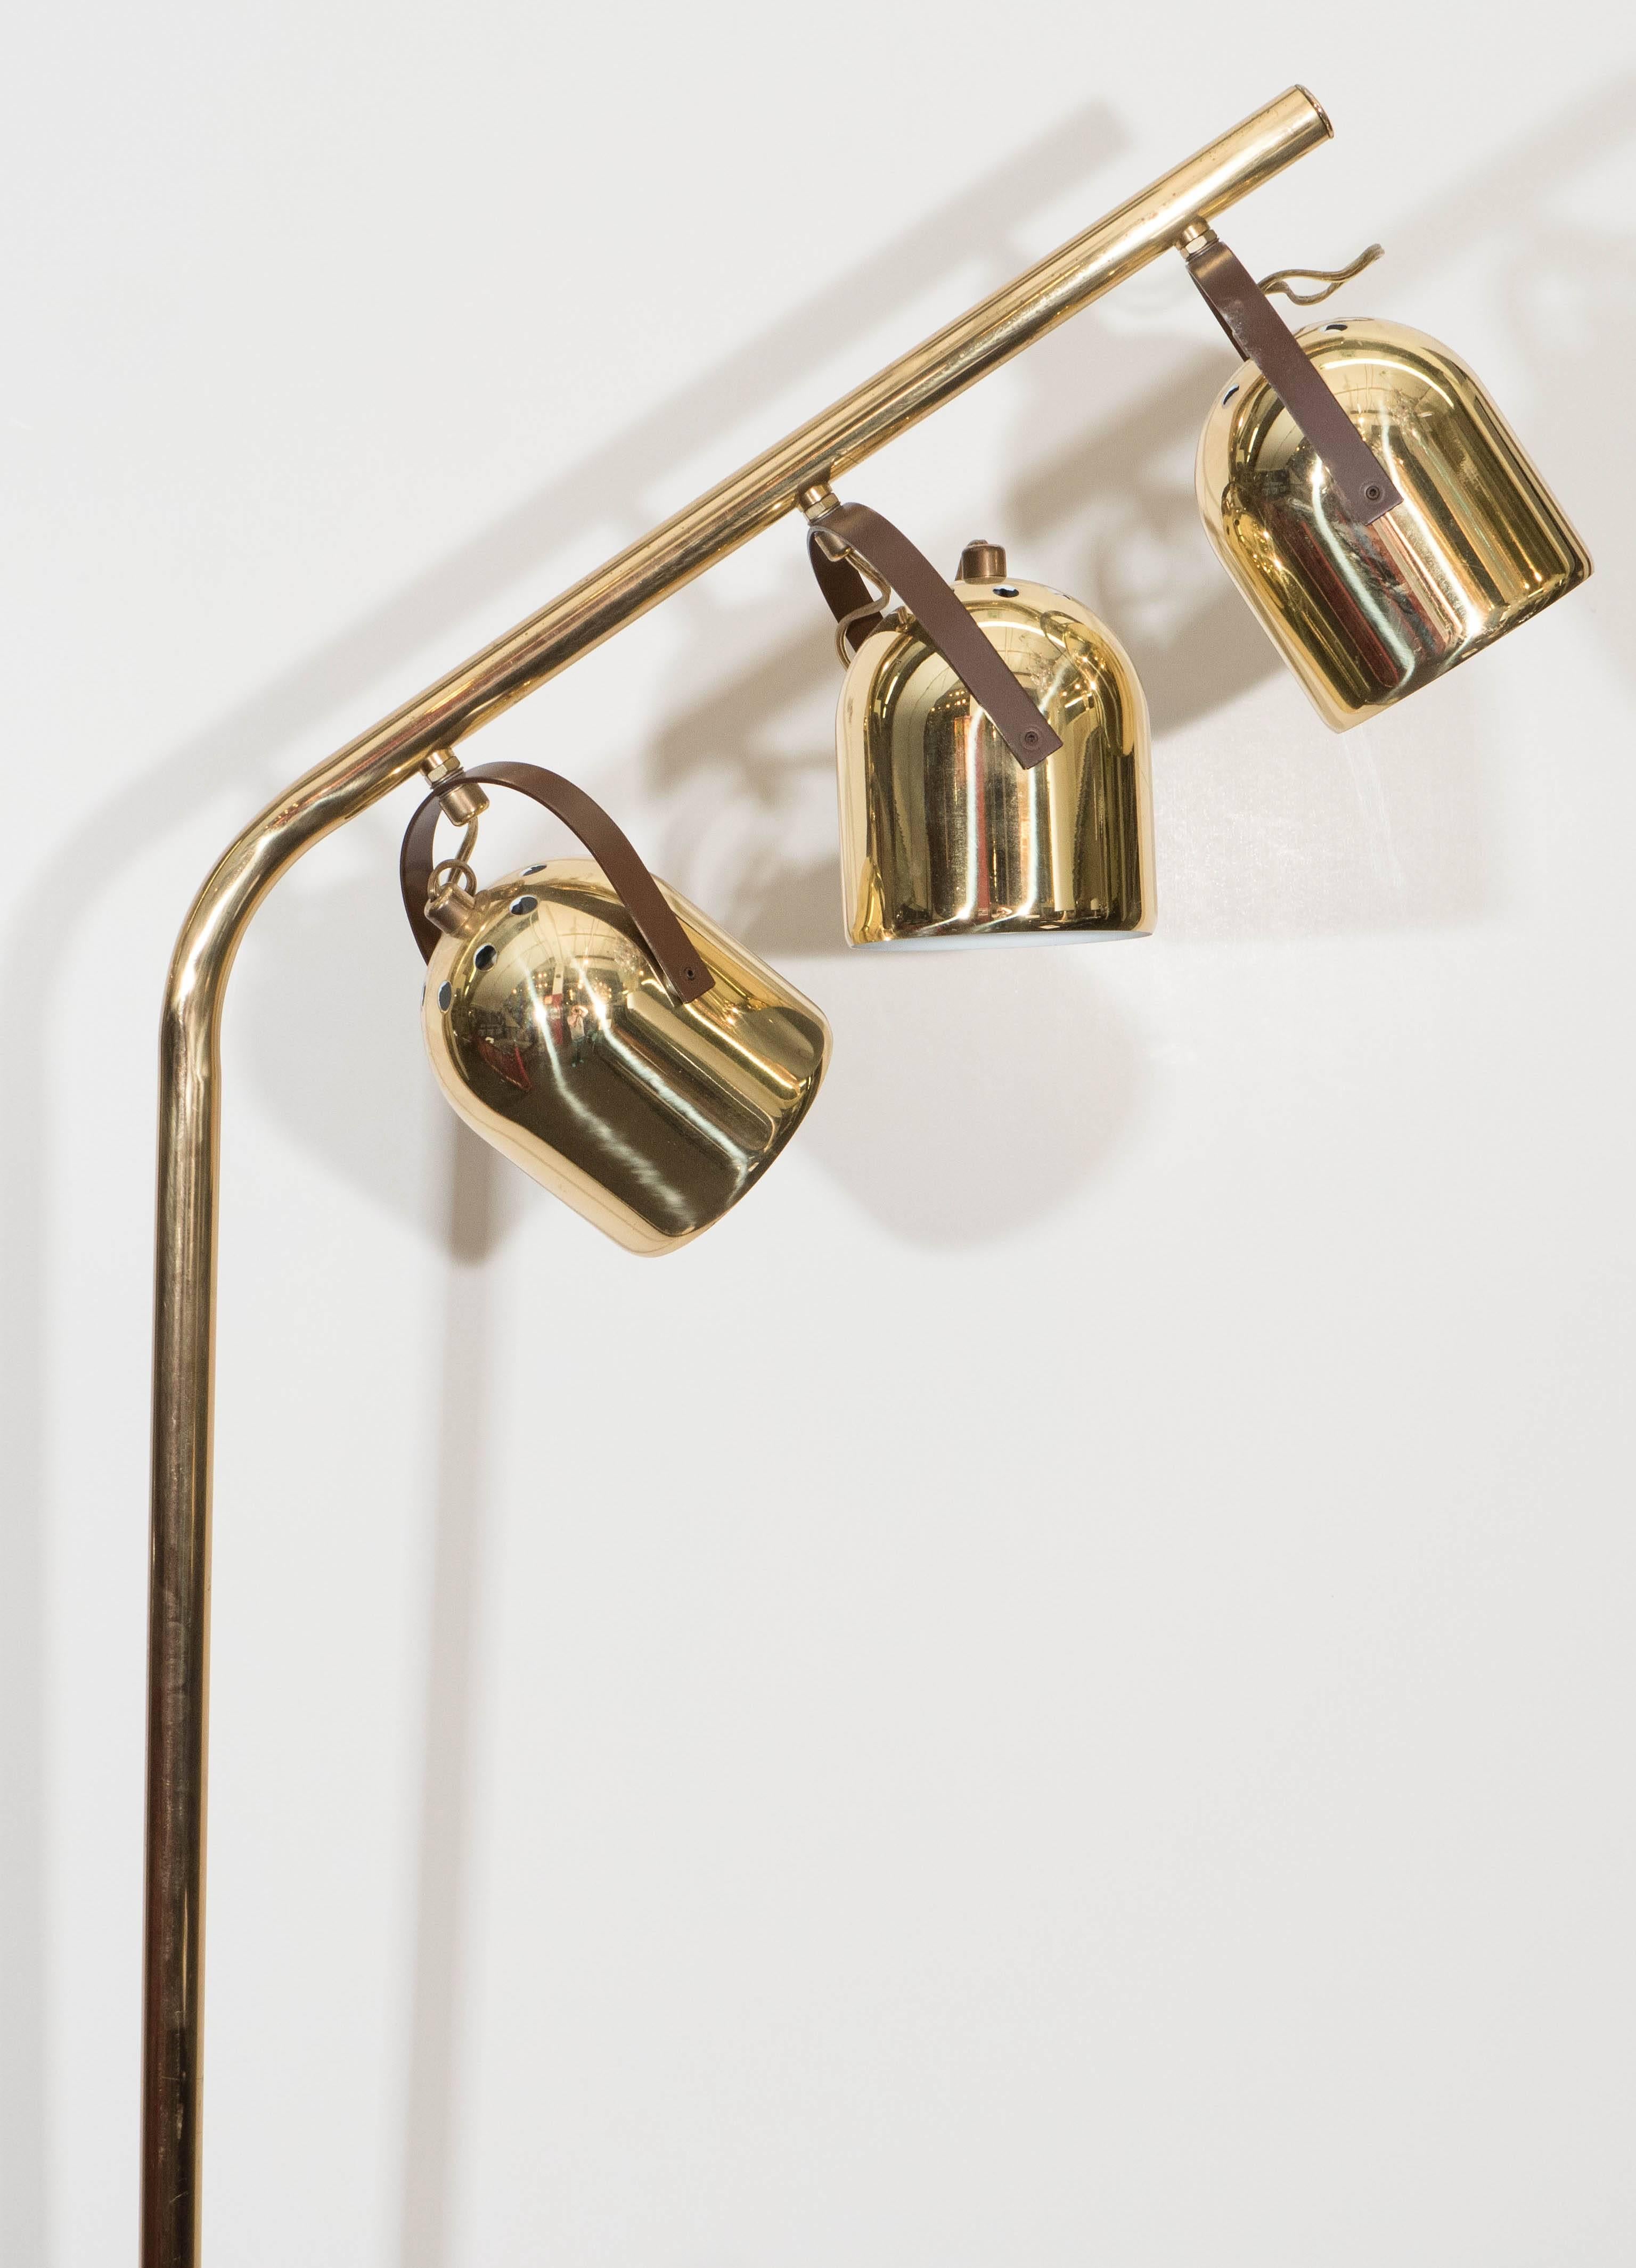 This vintage floor lamp by Koch & Lowy, comes in polished brass, with three pivoting rounded light shades, attached to an artfully bent stem, on a circular base; on/off switch included on stem. Very good overall condition, present wear